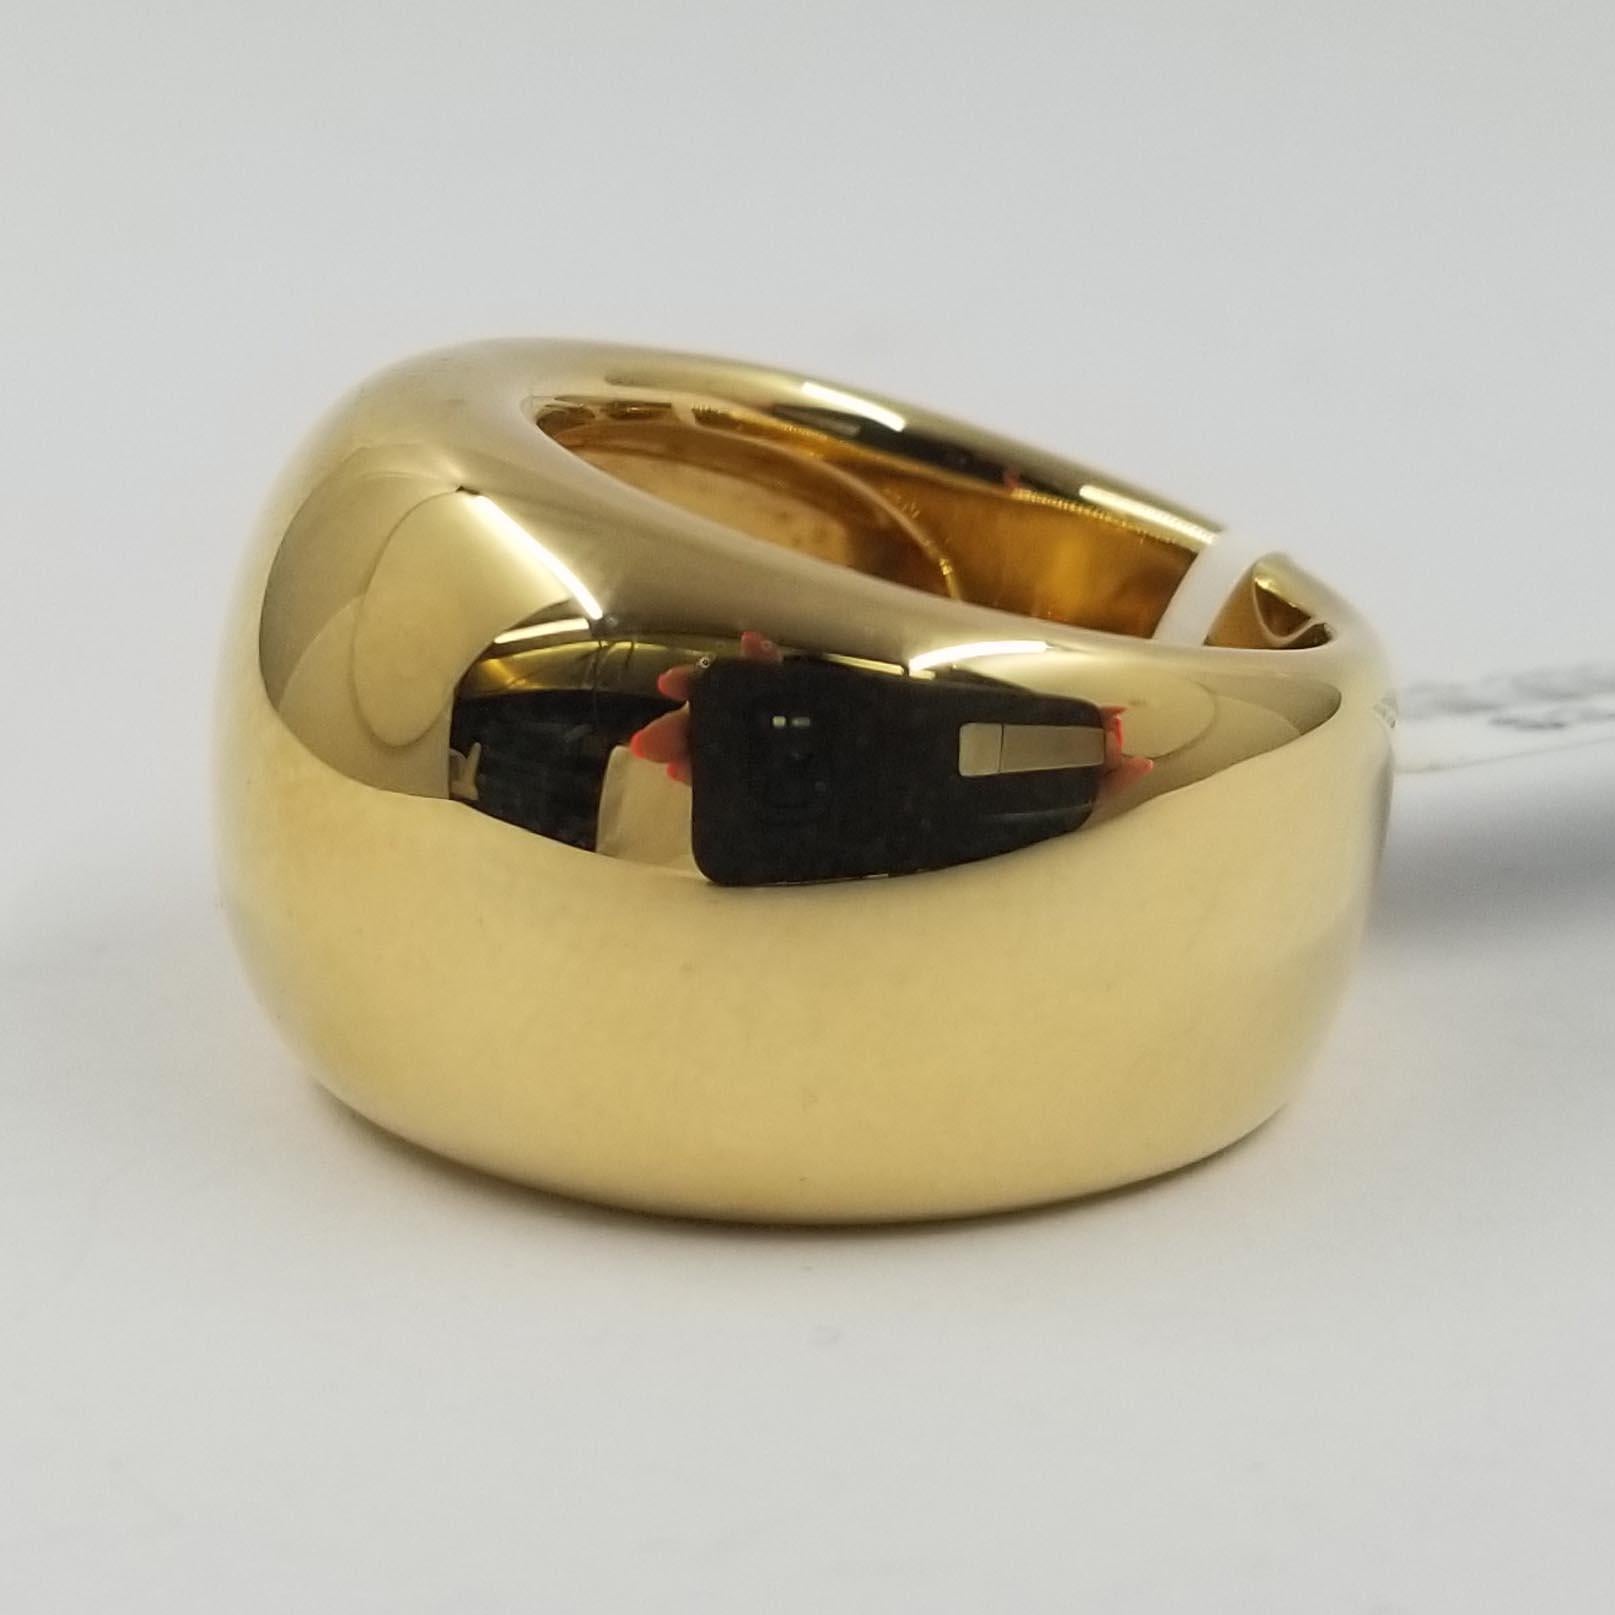 This simple ring is crafted in 18 karat yellow gold from designer Hammerman Brothers. It's heavy design is a high polish plain dome that tapers from 16mm wide at the top to 10mm at the back. Current finger size is 7.5; purchase includes one sizing